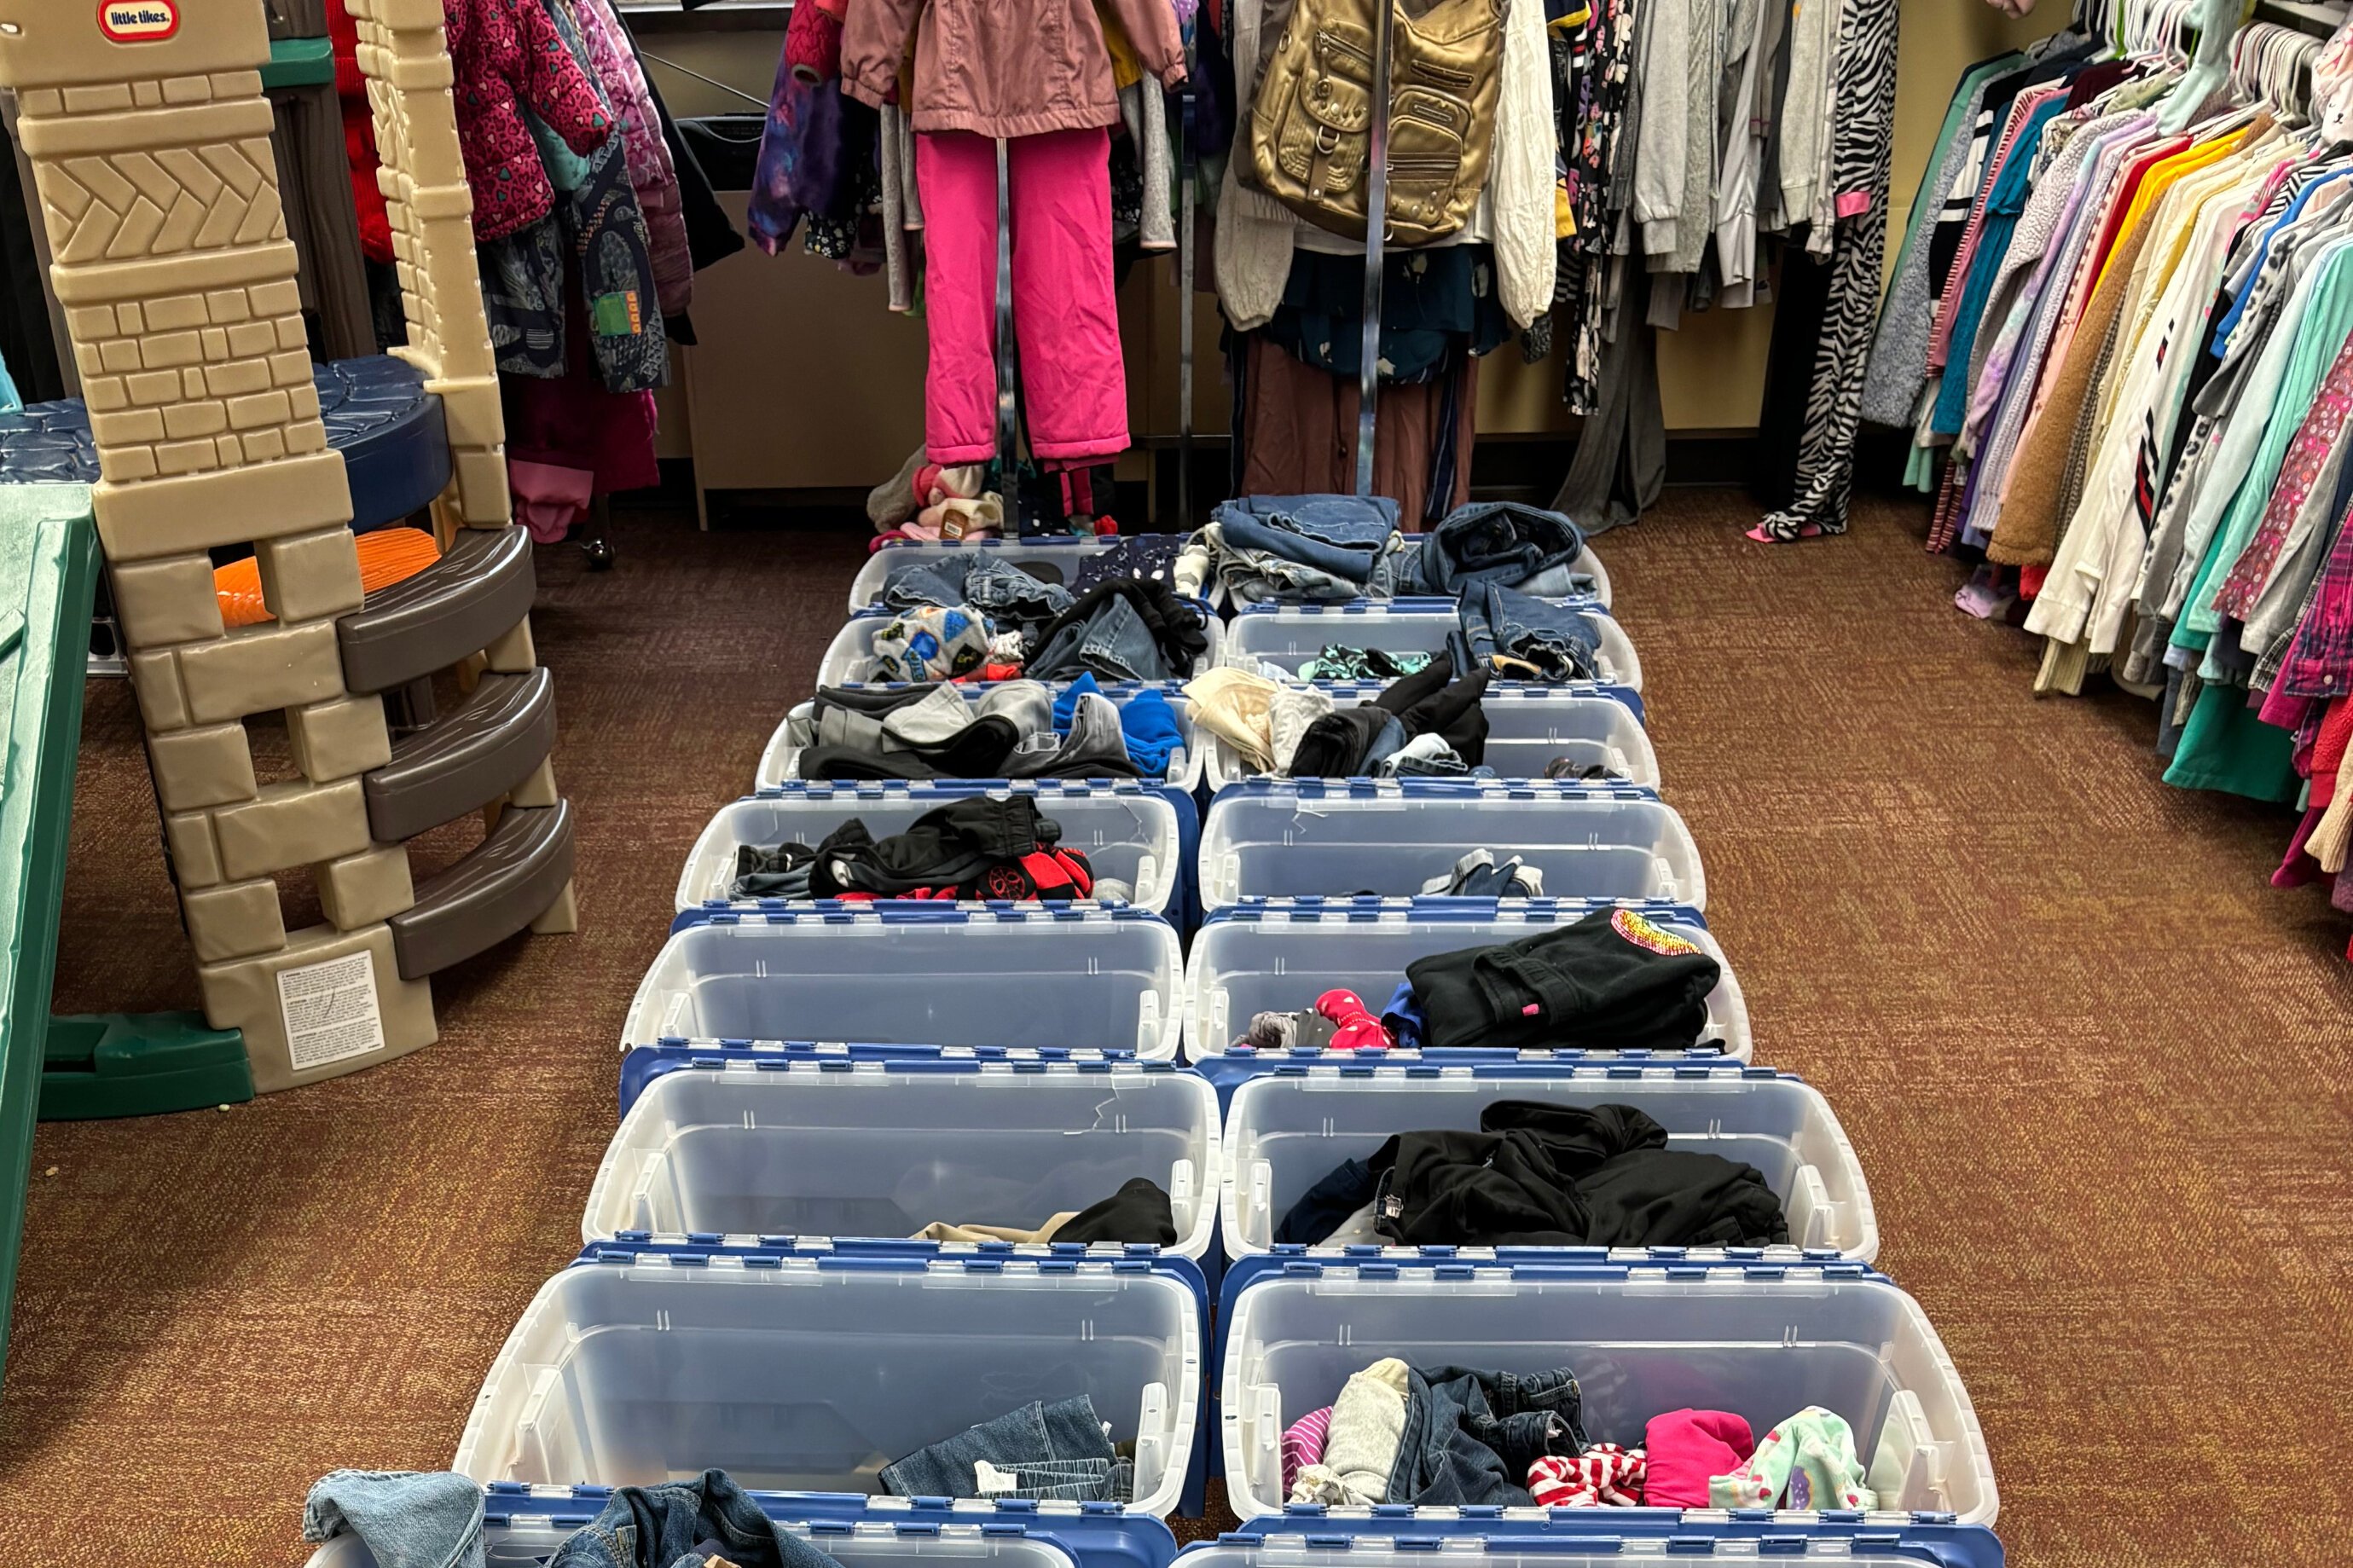 Mosaic Foster and Adoptive Ministry is a clothing co-op for foster children. Foster children can come and pick out any amount of new or gently used clothing that they need.